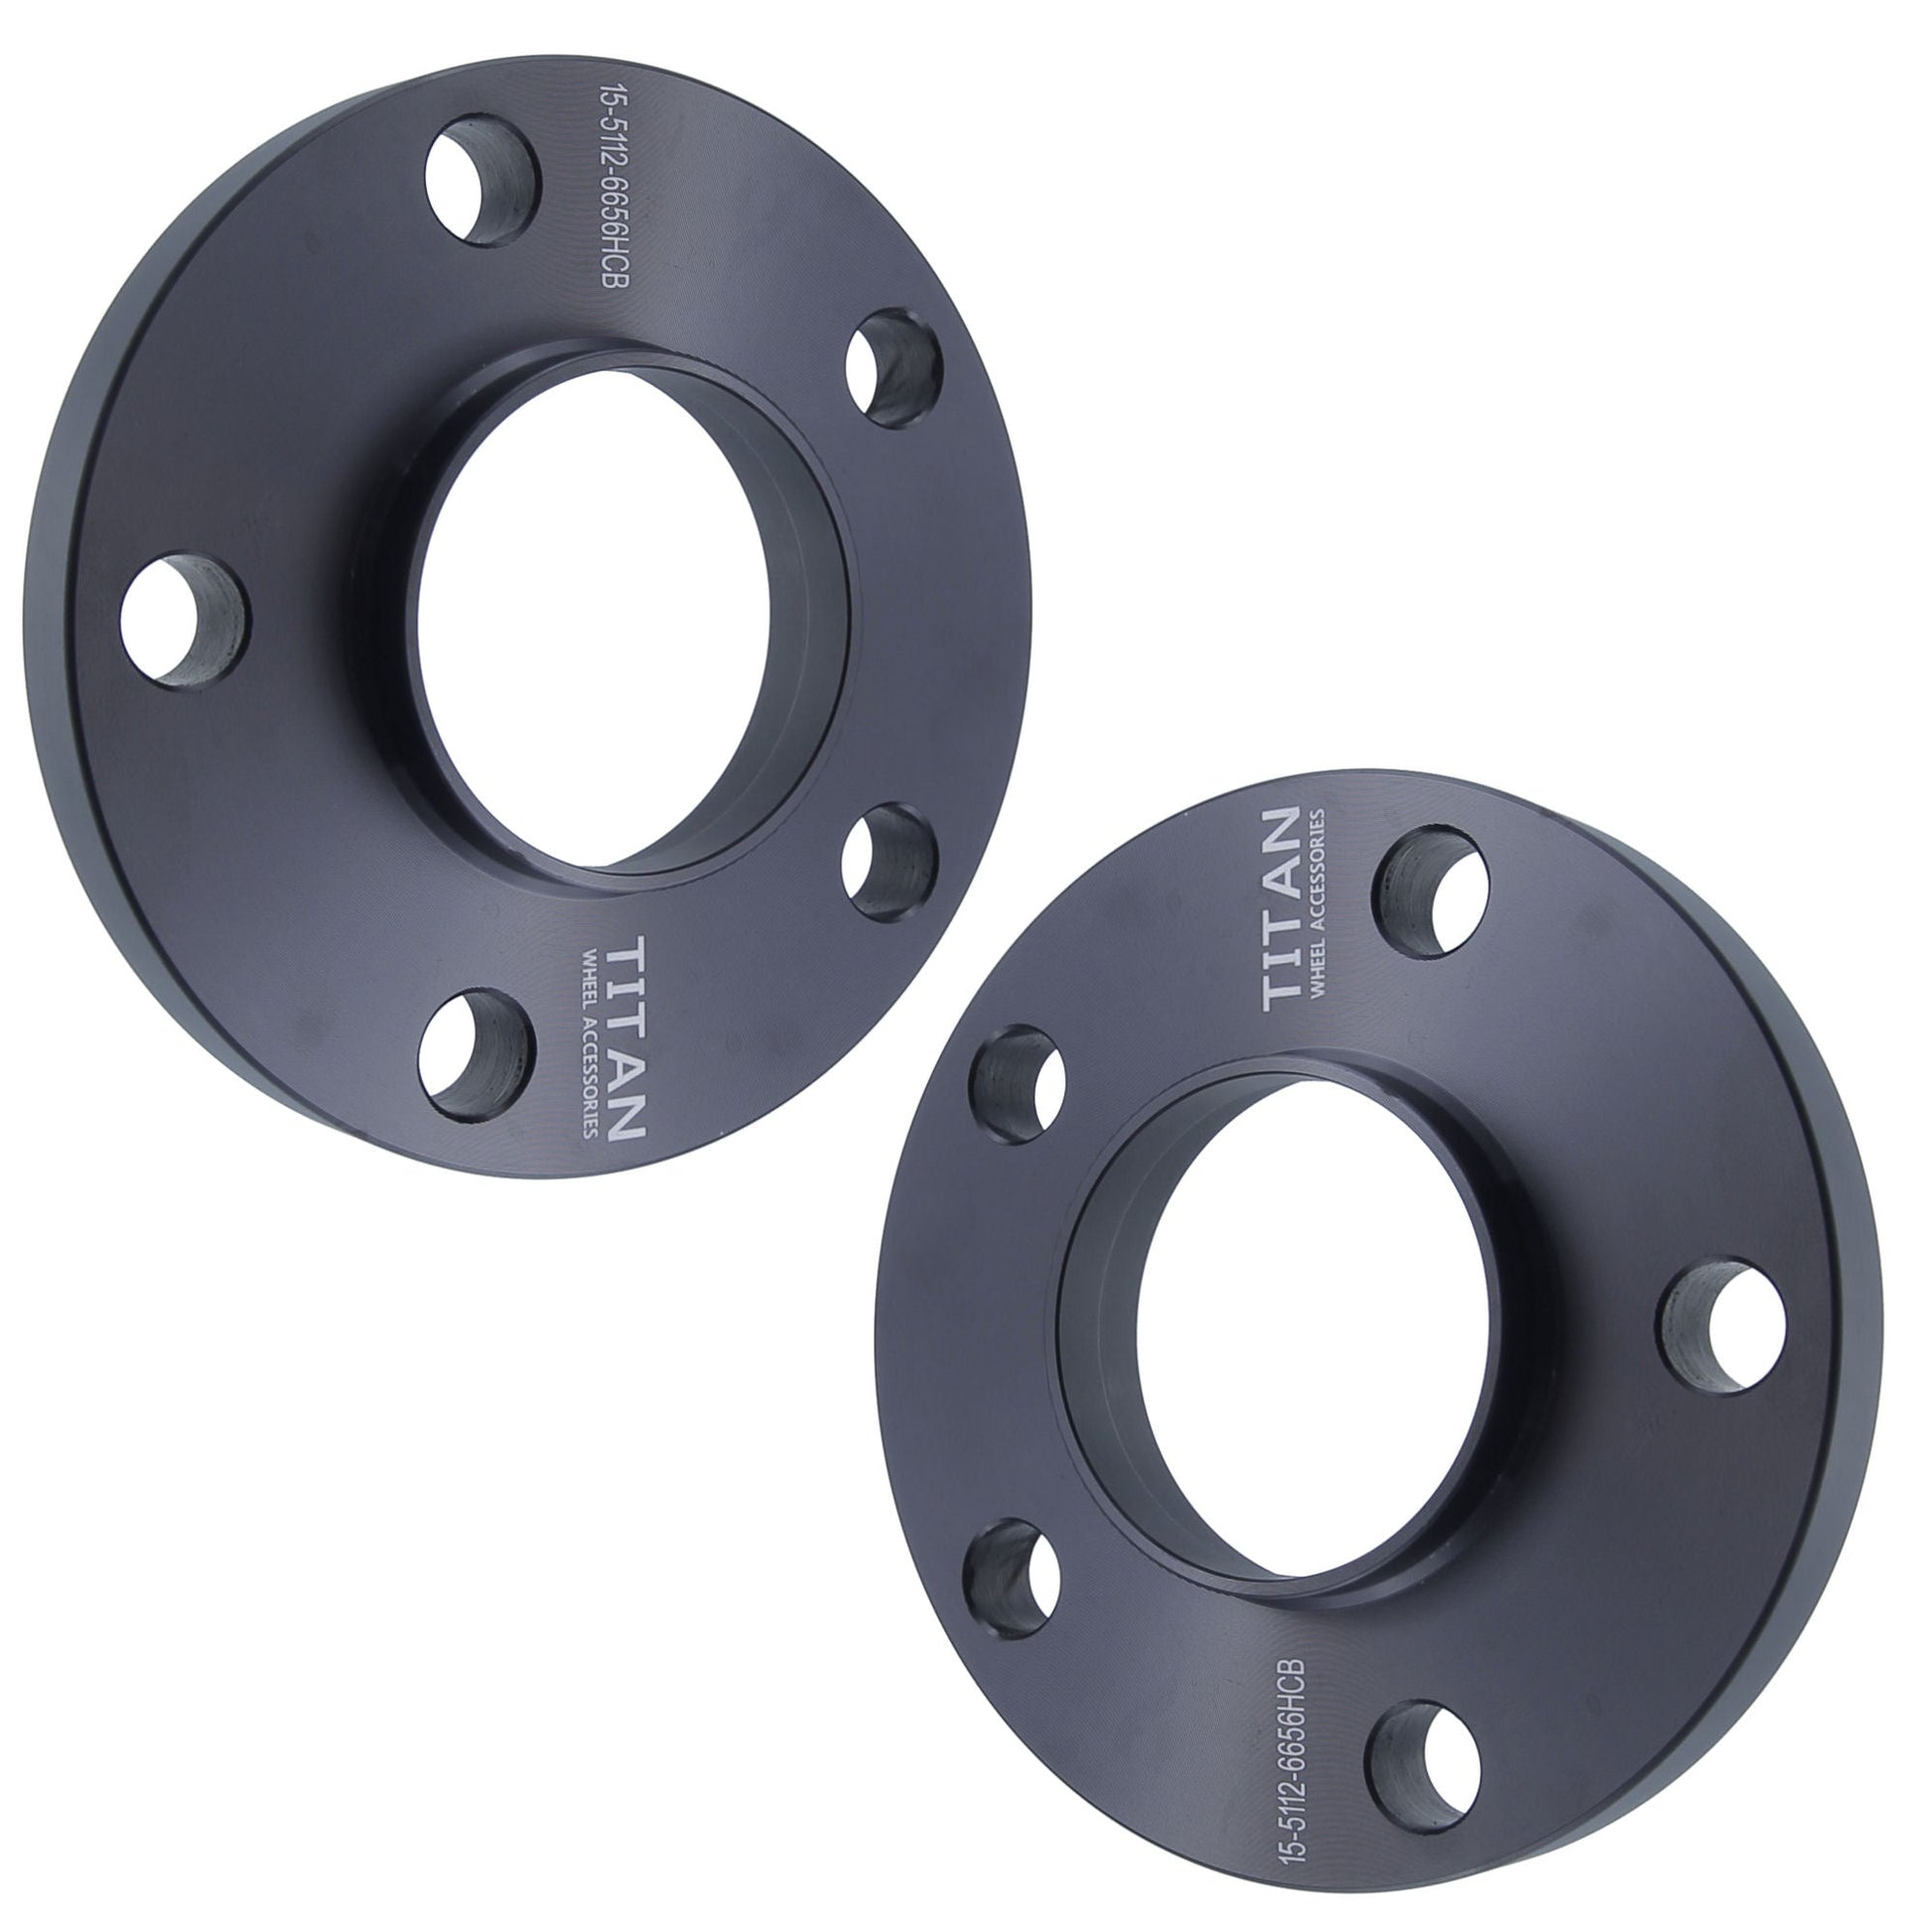 15mm Titan Wheel Spacers for VW Audi Mercedes | 5x112 | 66.56 Hubcentric | Set of 4 | Titan Wheel Accessories